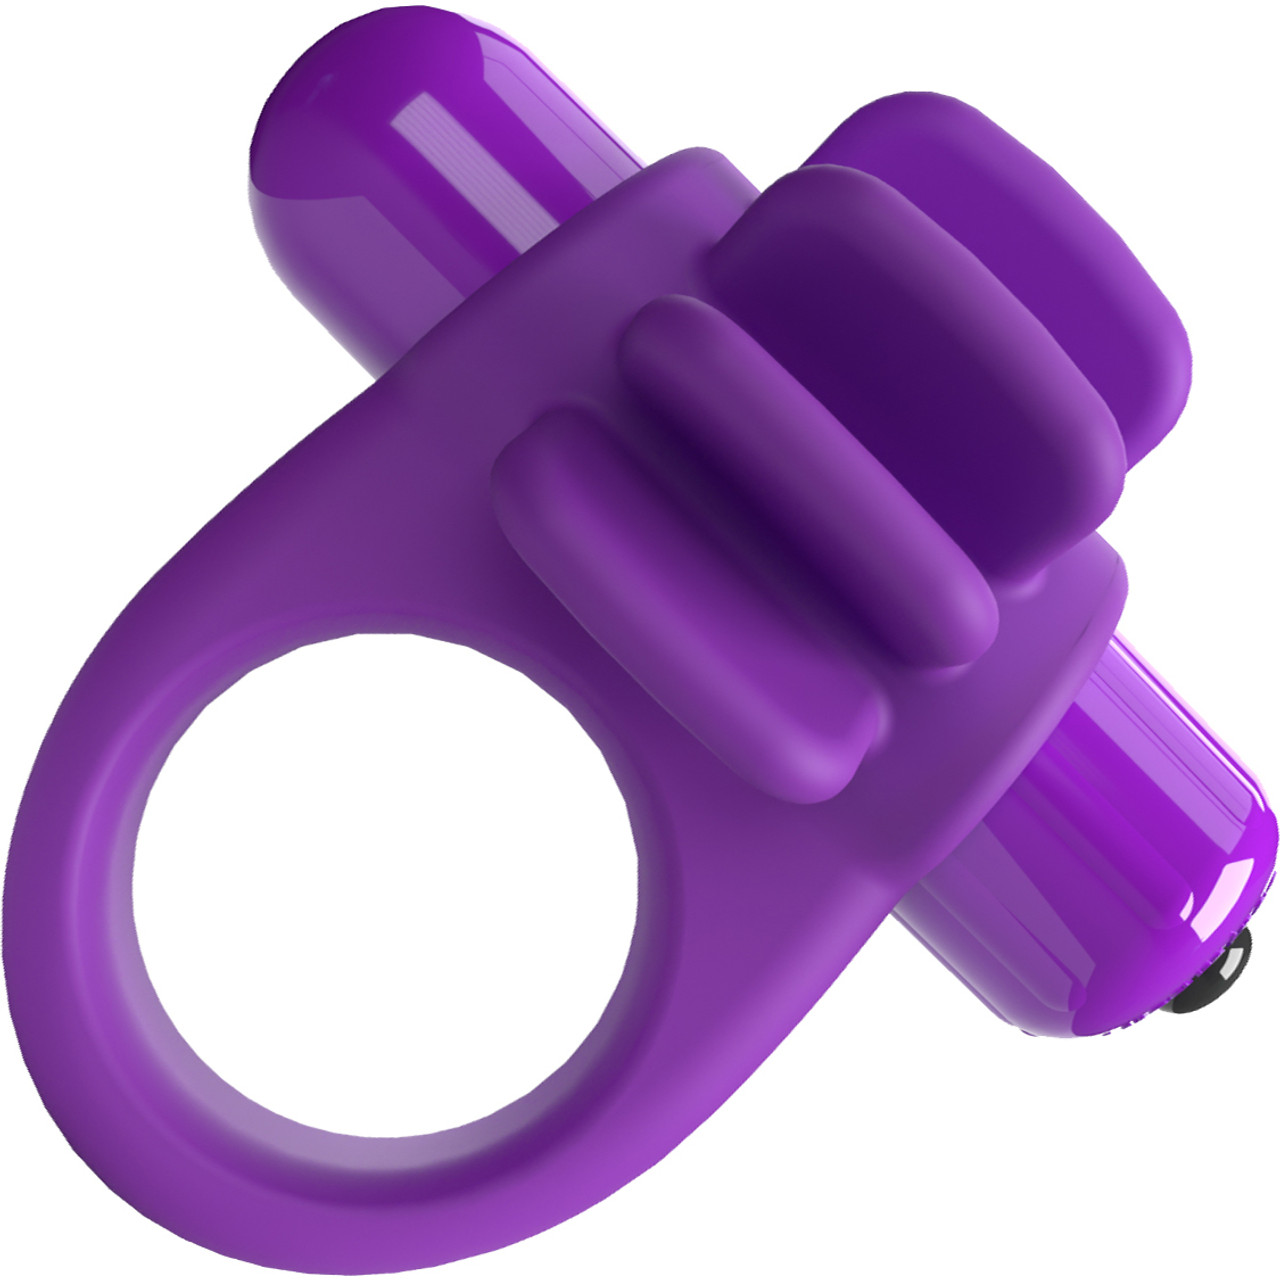 4B Skooch Vibrating Silicone Cock Ring By Screaming O - Grape